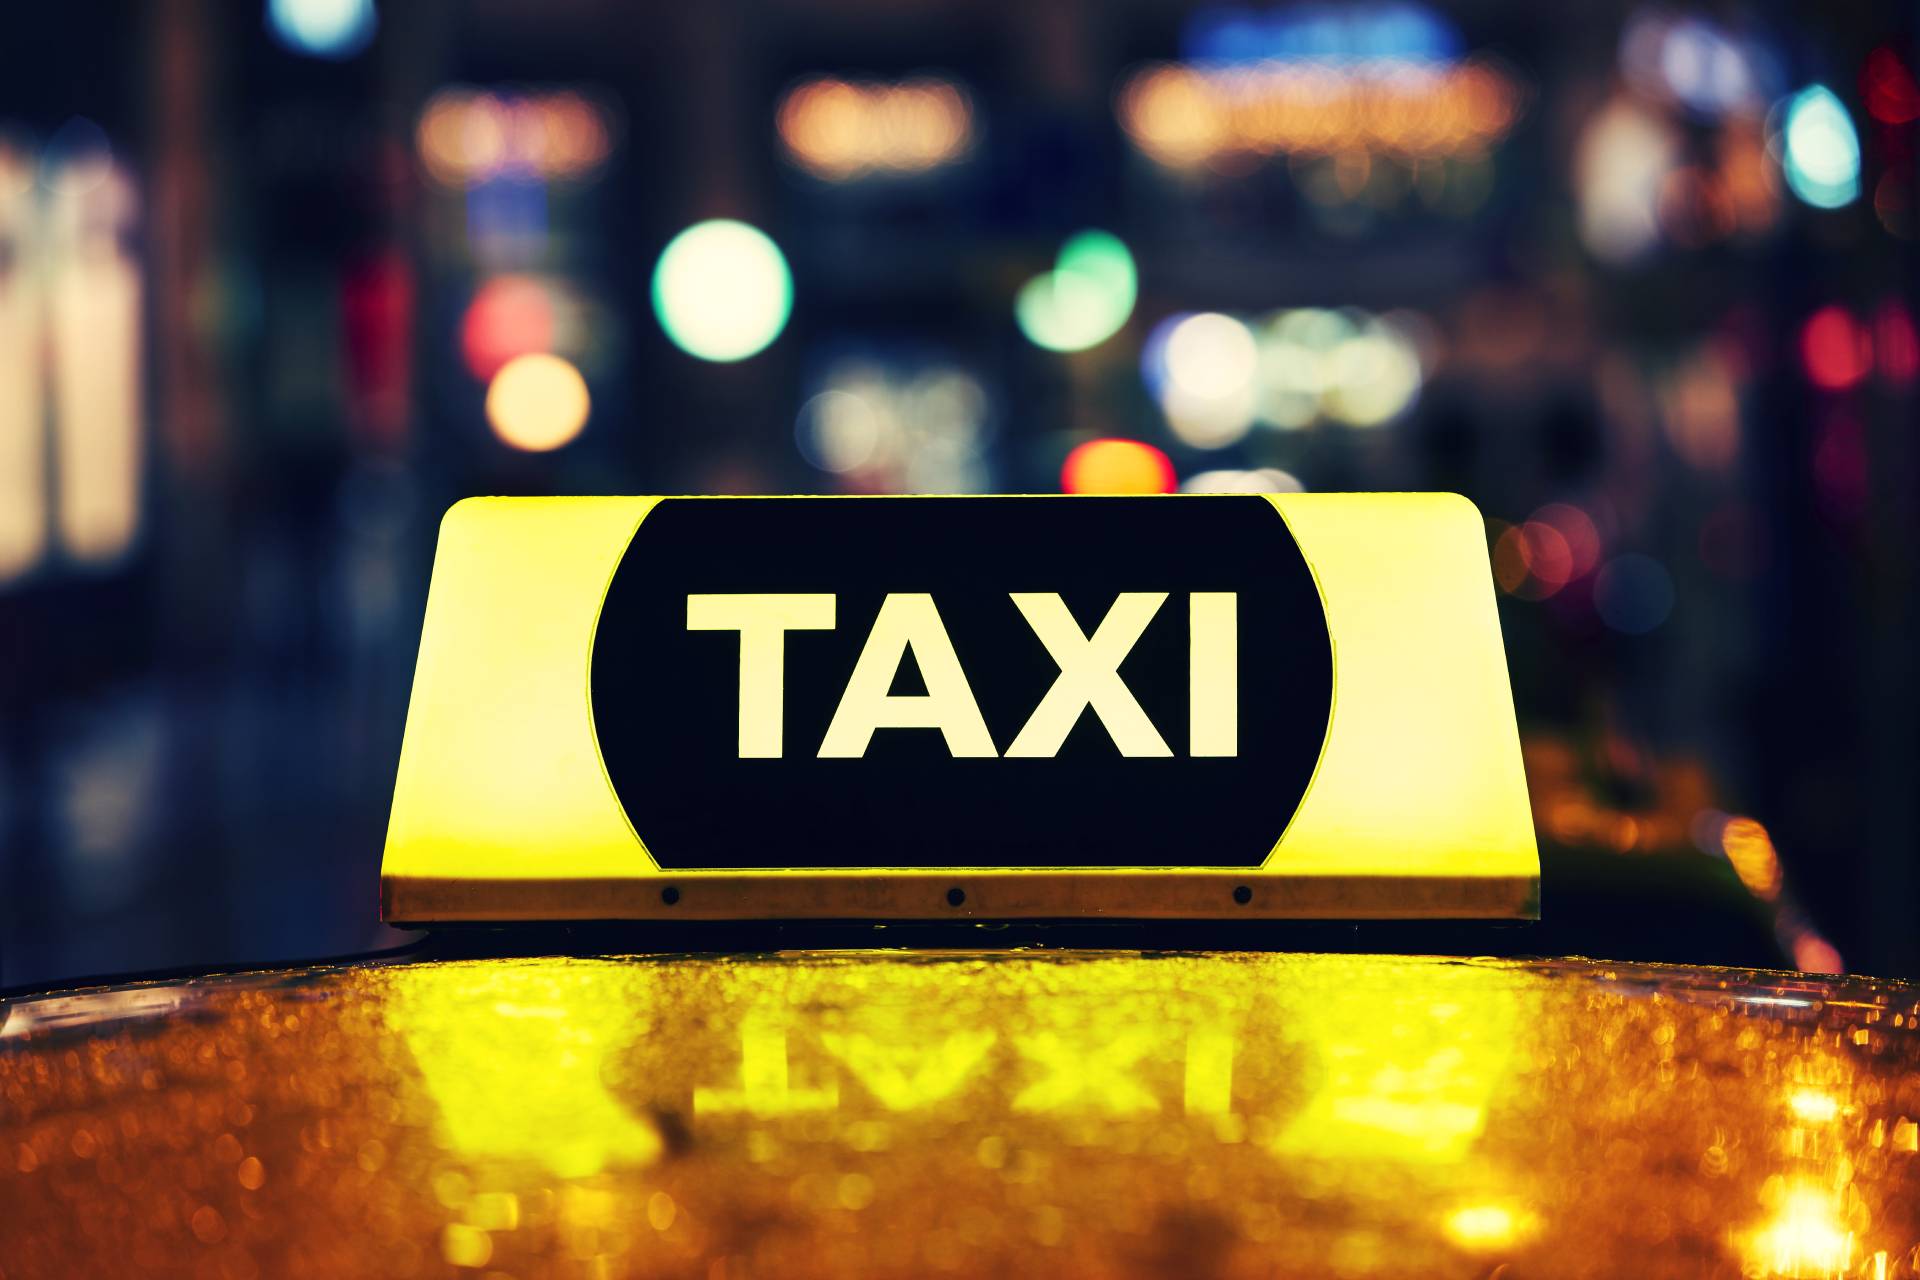 Illuminated taxi sign on top of cab at night